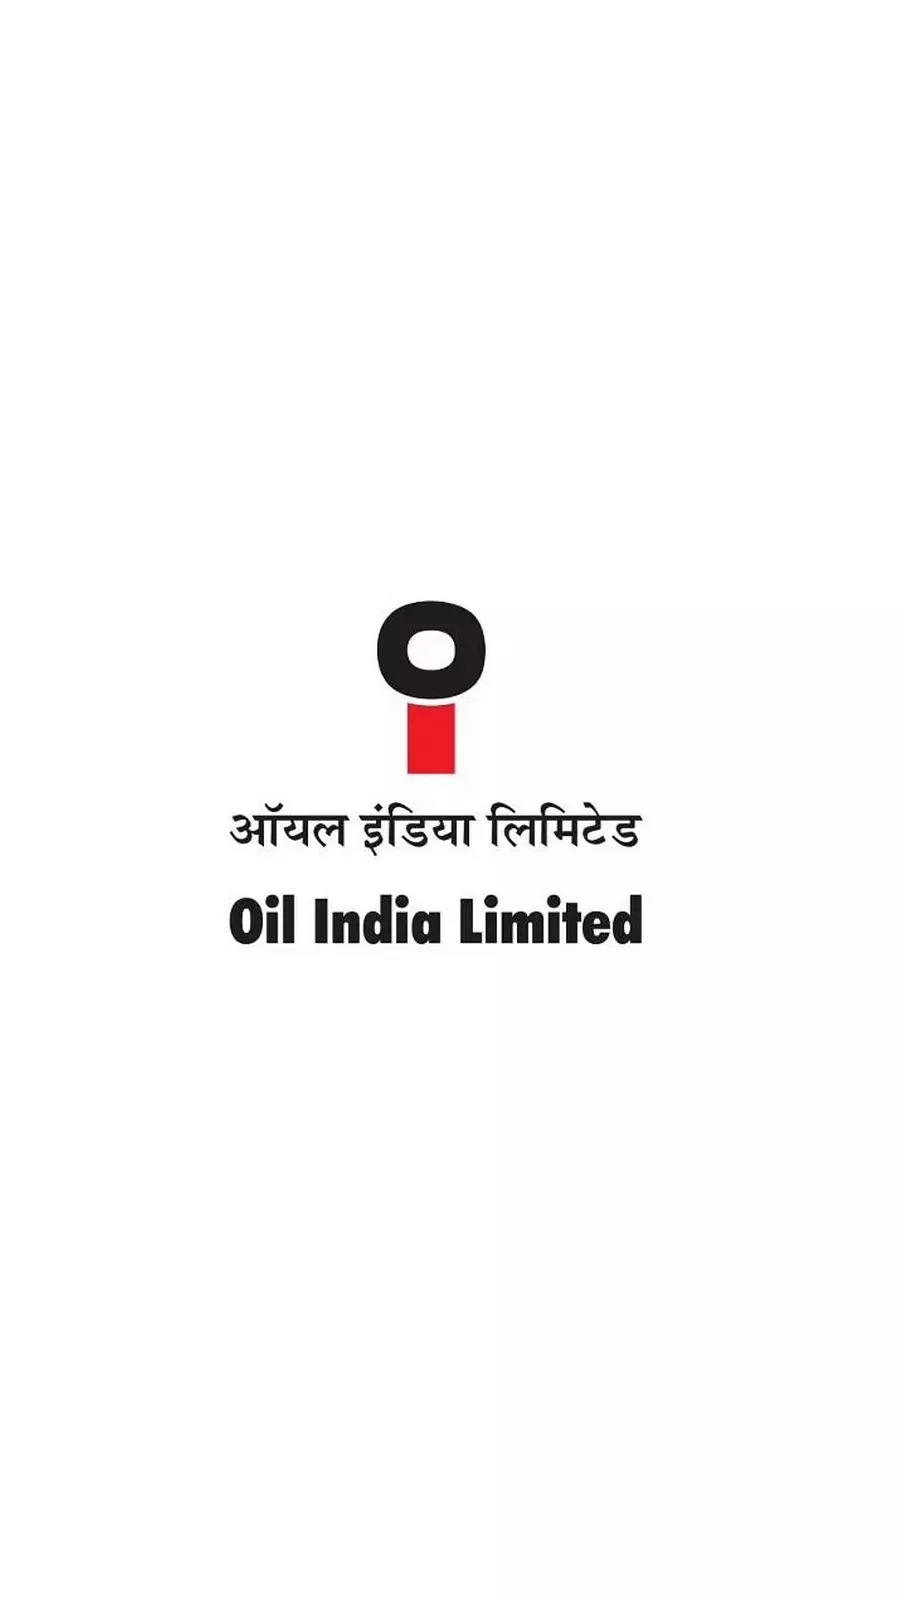 Assam, India - April 19, 2021 : Indian Oil Corporation Logo on Phone Screen  Stock Image. Editorial Photo - Image of industrial, april: 216543021